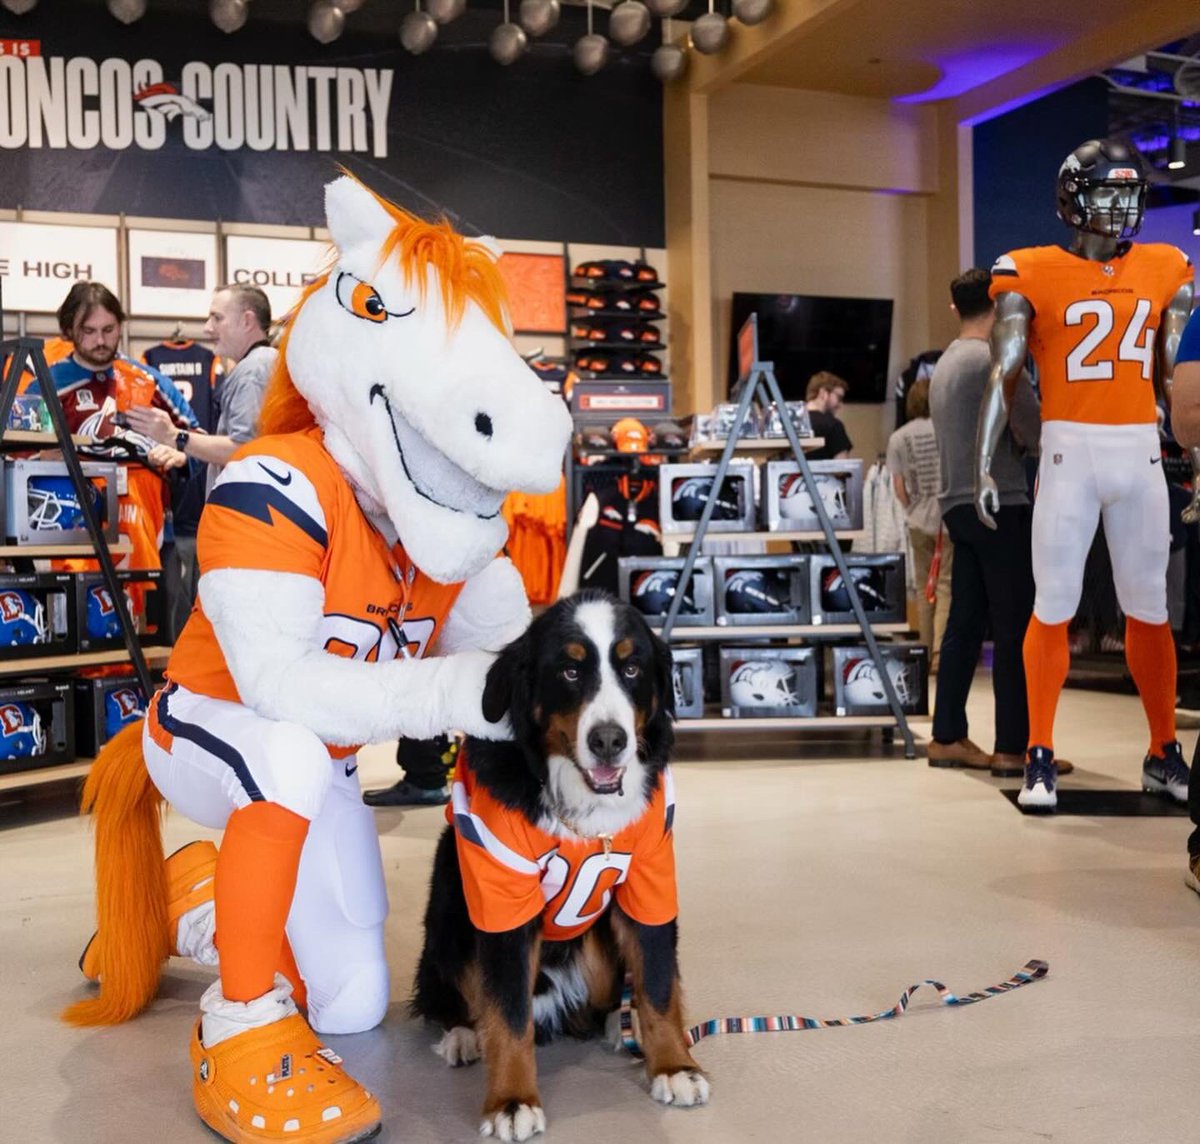 Some photos taken by my buddy @gchristus at the @Broncos Uniform Release Party! 🐶🧡🏈🐴 #BroncosCountry